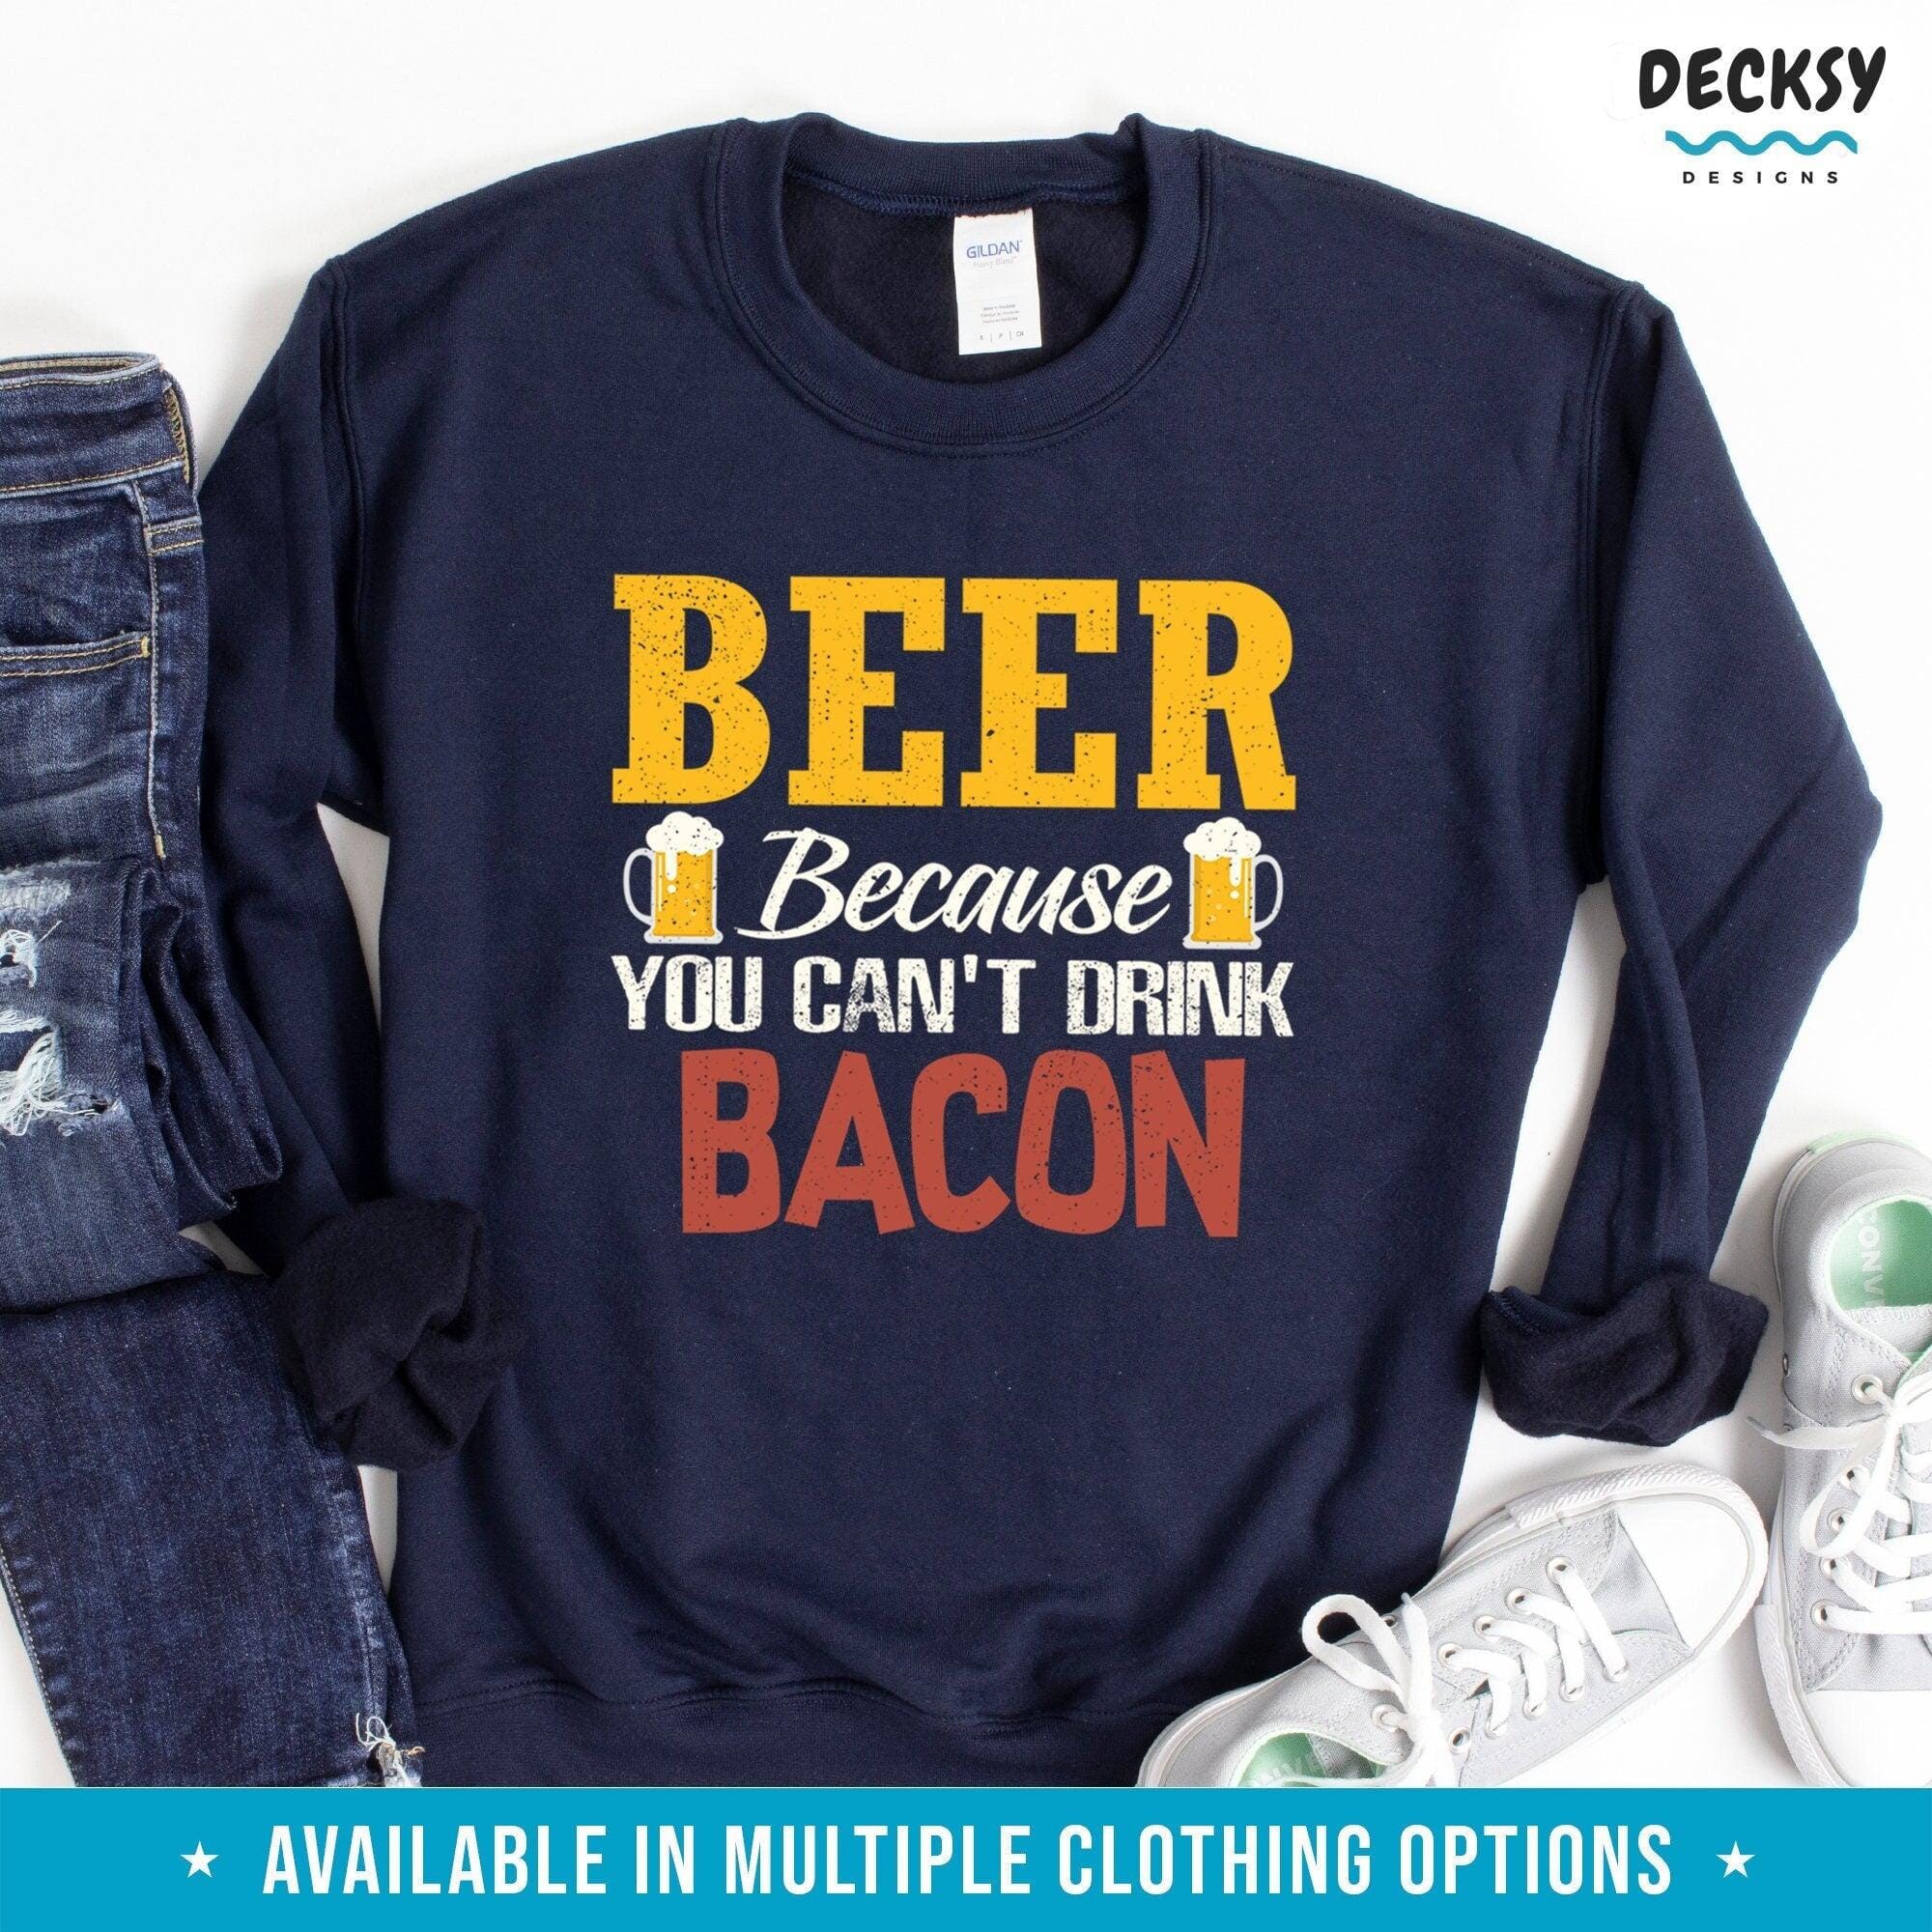 Beer Shirt, Bacon Lover Gift-Clothing:Gender-Neutral Adult Clothing:Tops & Tees:T-shirts:Graphic Tees-DecksyDesigns